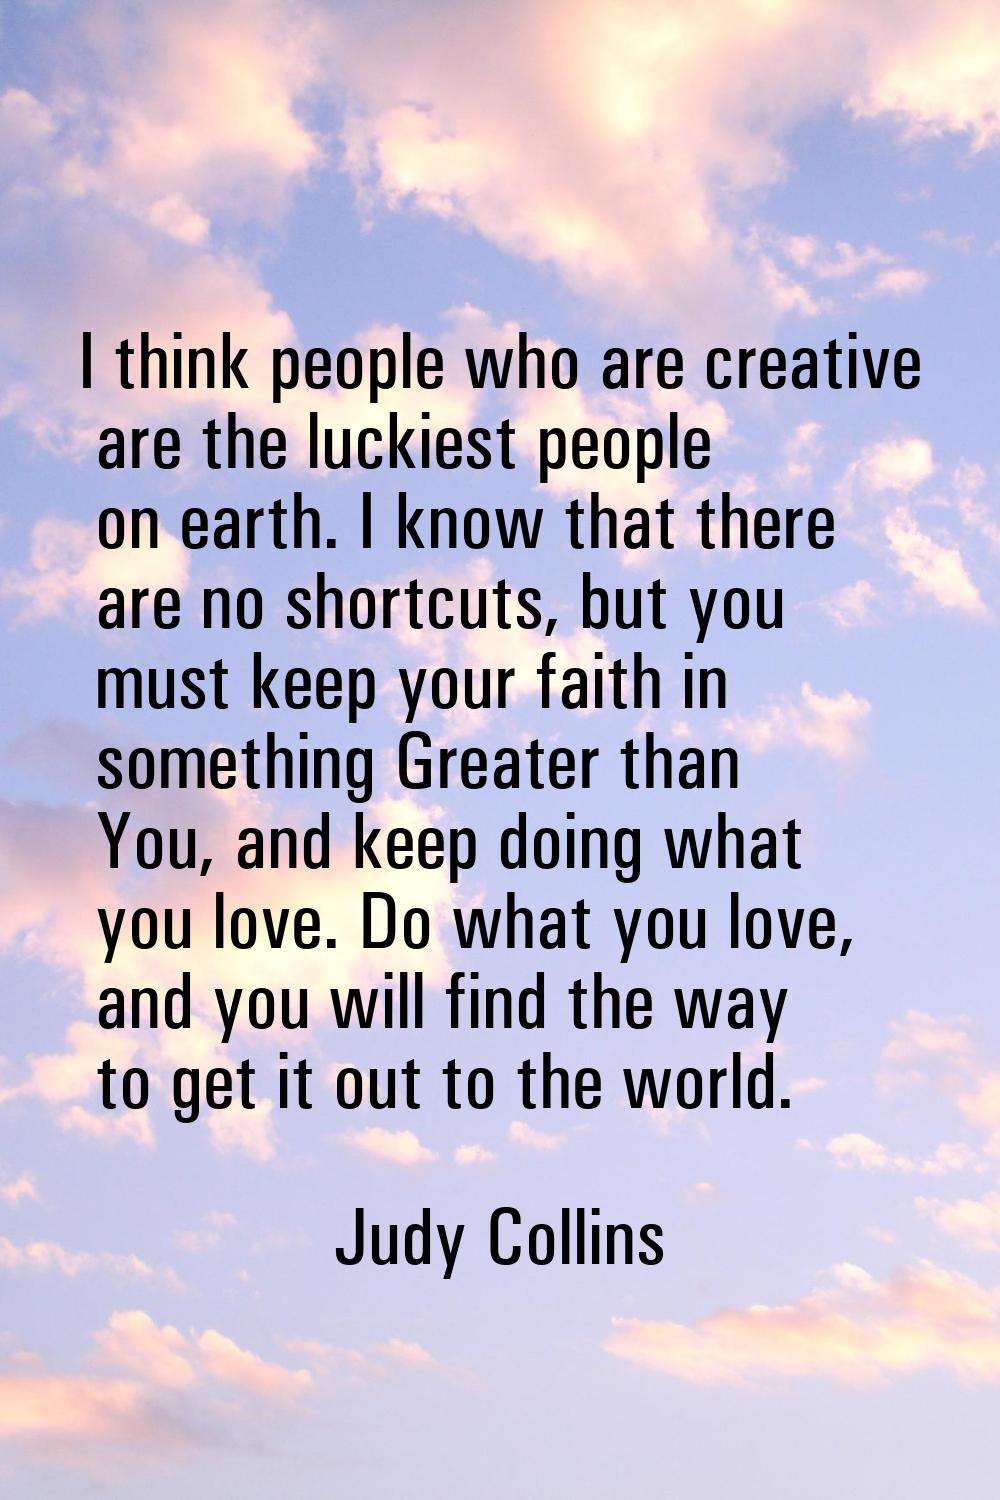 I think people who are creative are the luckiest people on earth. I know that there are no shortcut